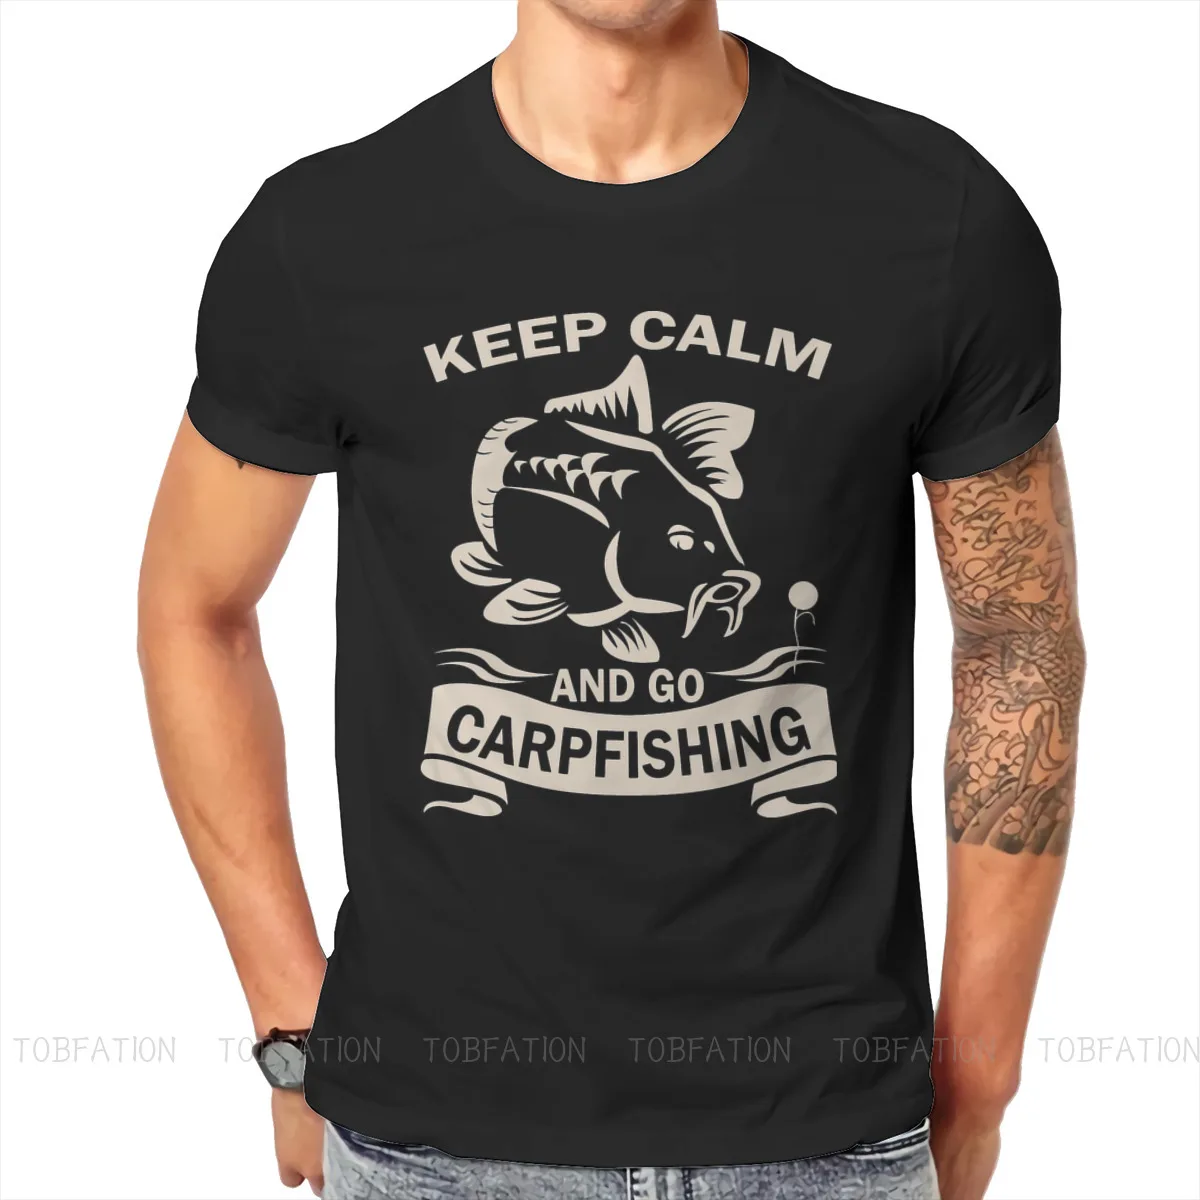 

Keep Calm And Go Unique TShirt Carp Fishing Fisher Casual Size S-6XL T Shirt Newest Stuff For Men Women